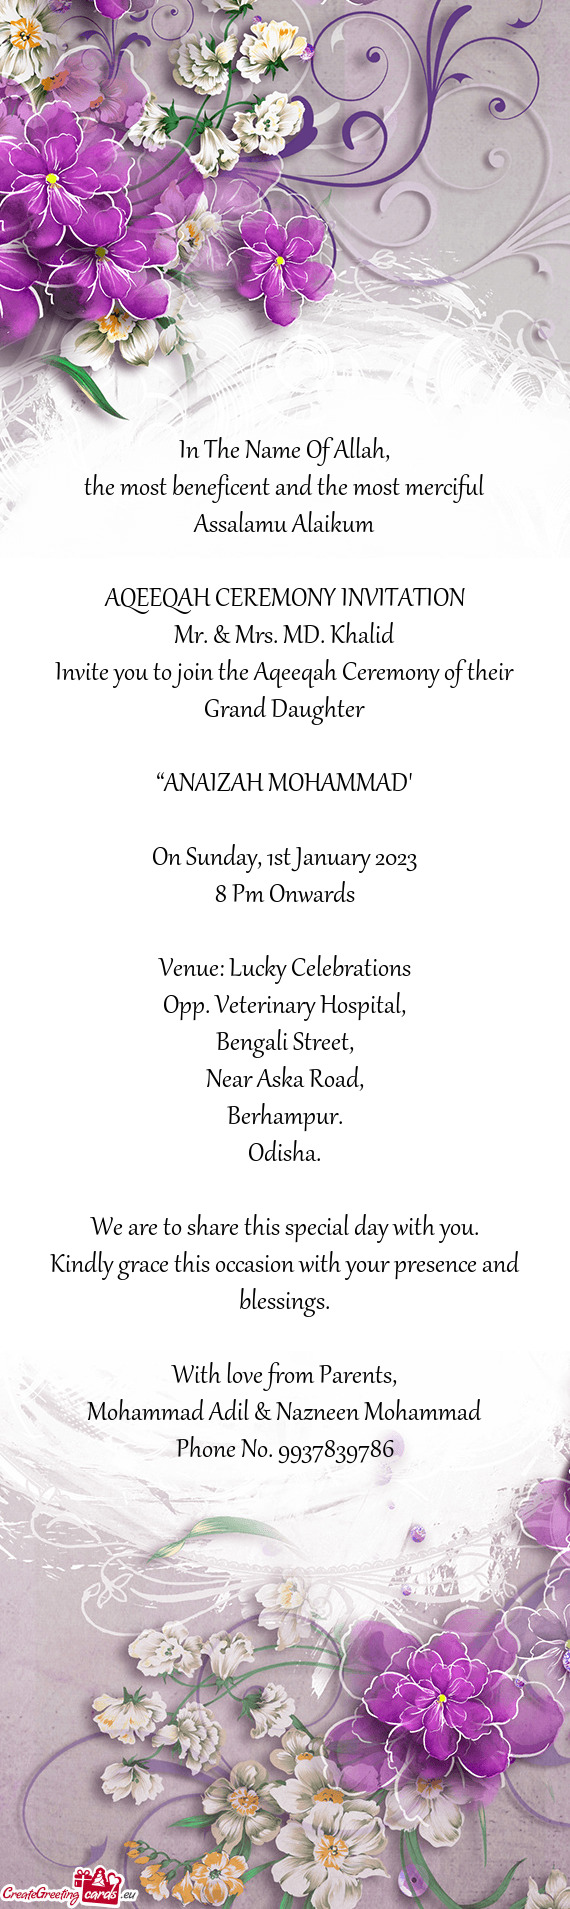 Invite you to join the Aqeeqah Ceremony of their